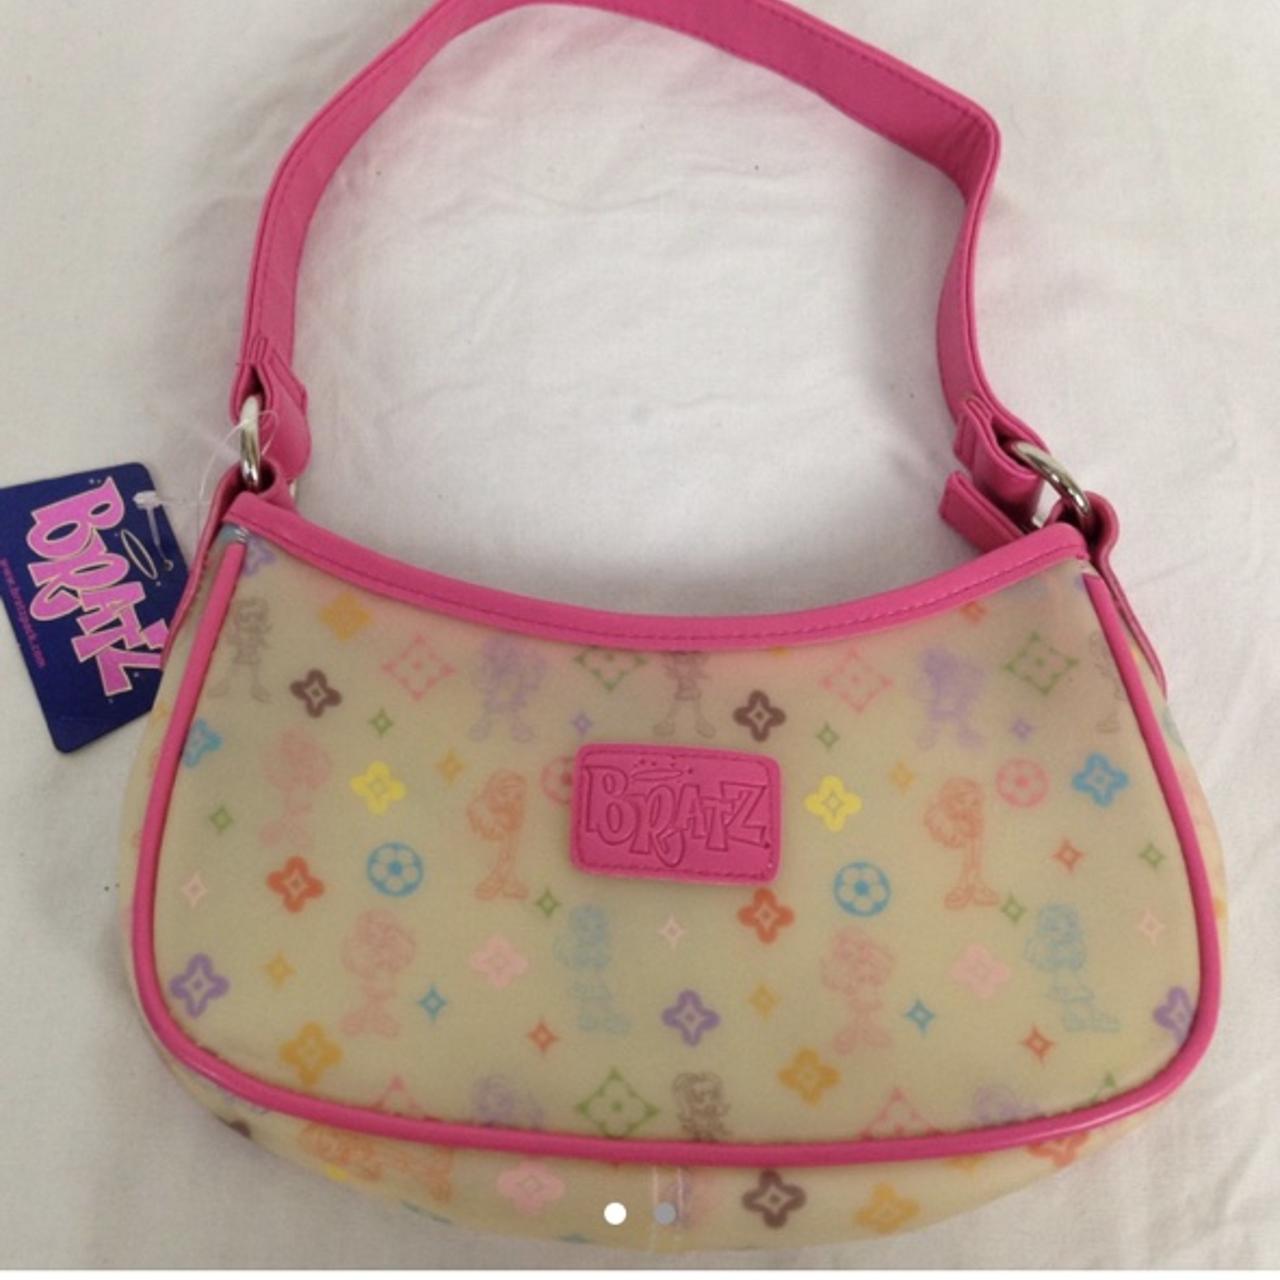 ‼️DO NOT BUY ‼️ looking for BRATZ MONOGRAM PURSE any